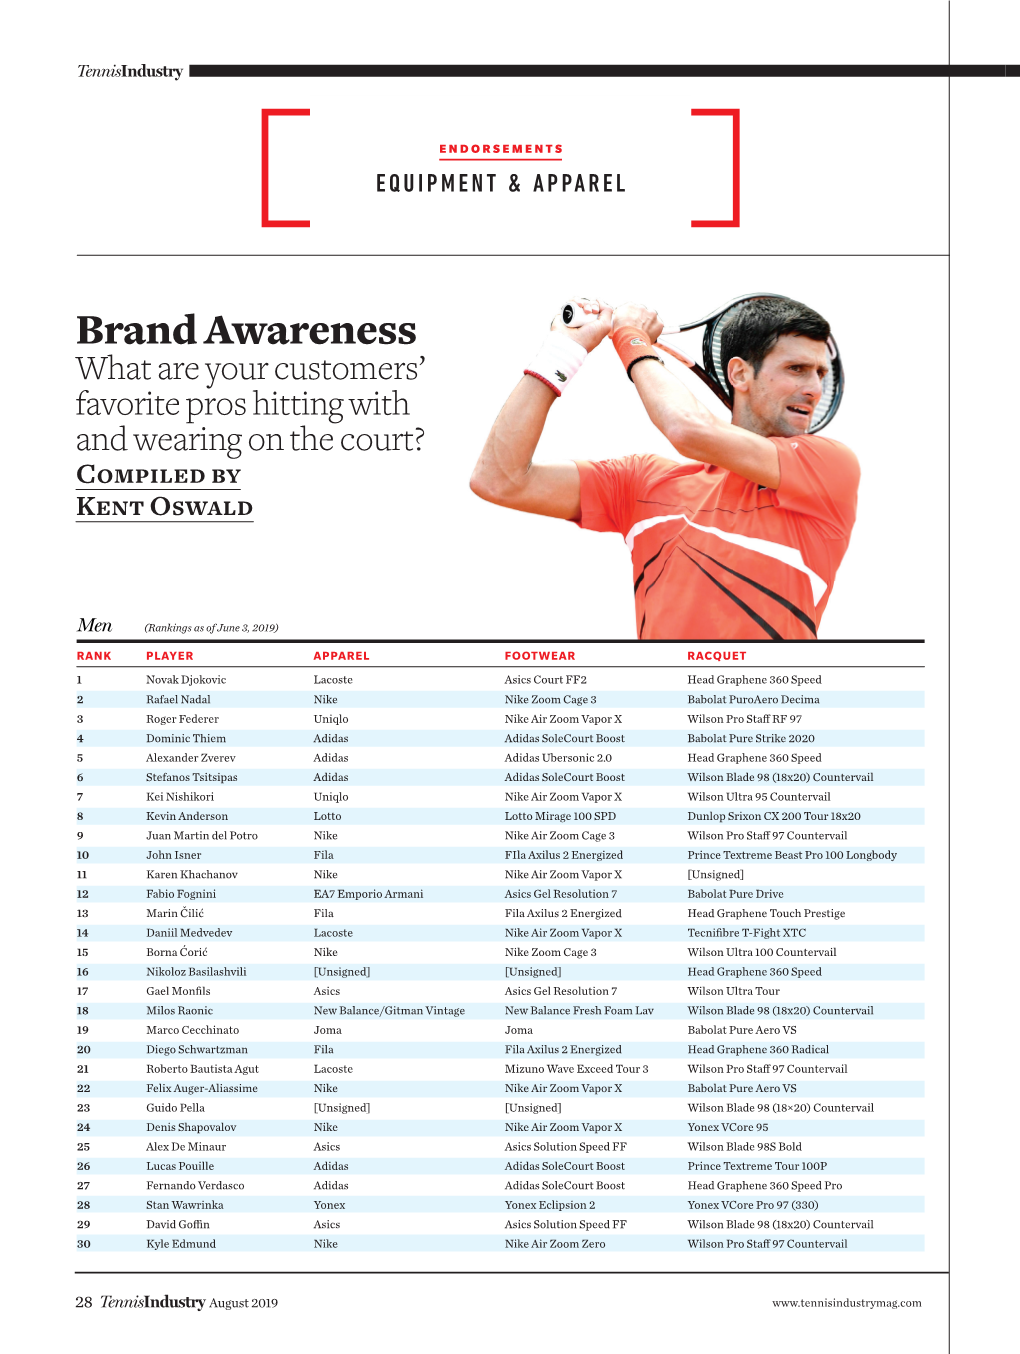 Brand Awareness What Are Your Customers’ Favorite Pros Hitting with and Wearing on the Court? Compiled by Kent Oswald